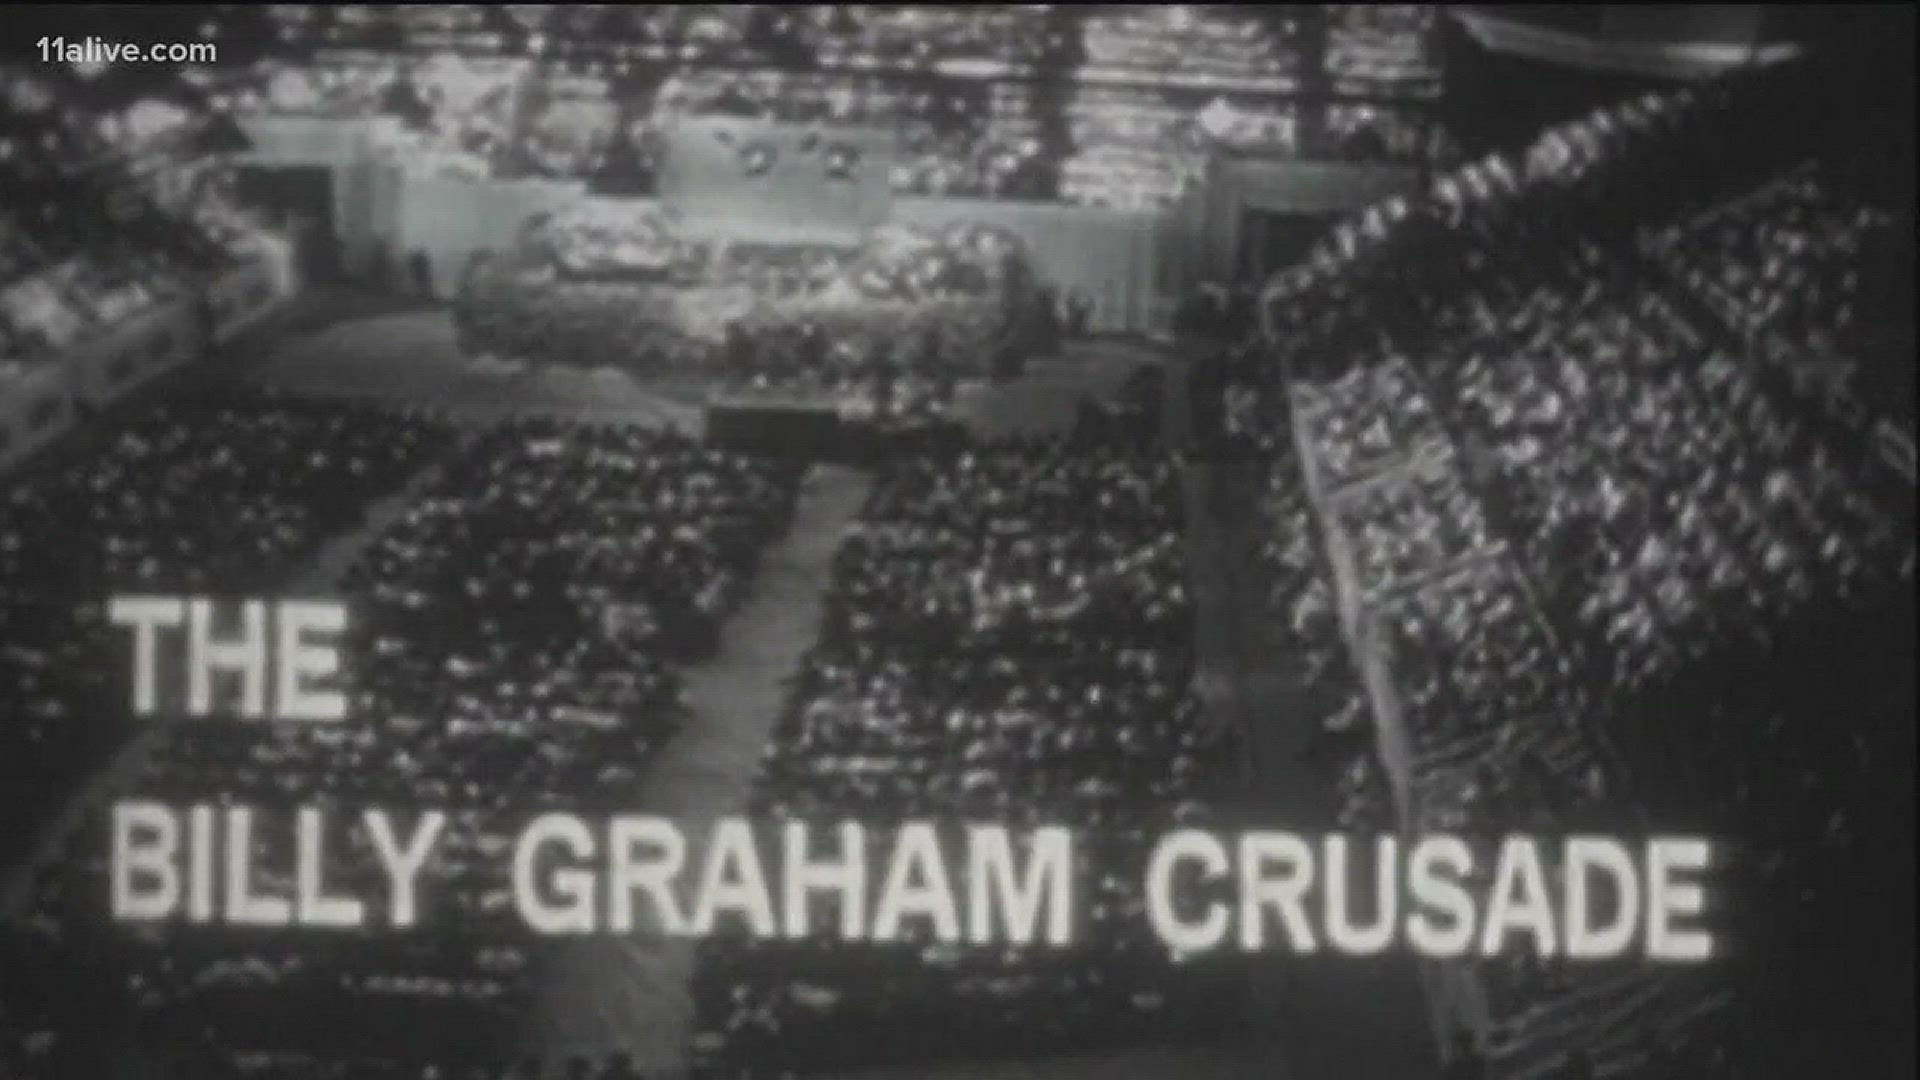 Billy Graham is remembered for his presence, influence, crusades.